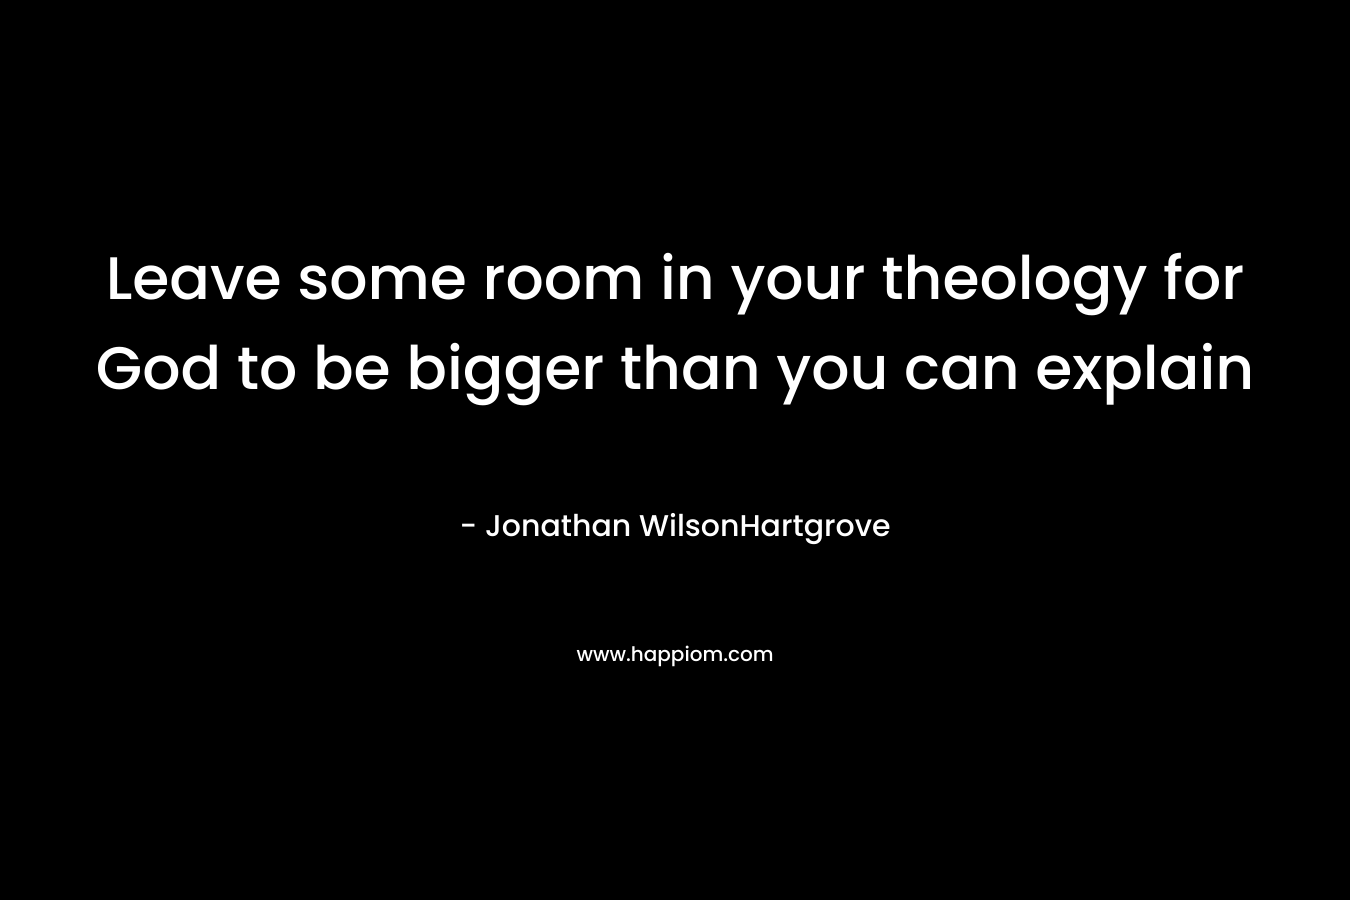 Leave some room in your theology for God to be bigger than you can explain